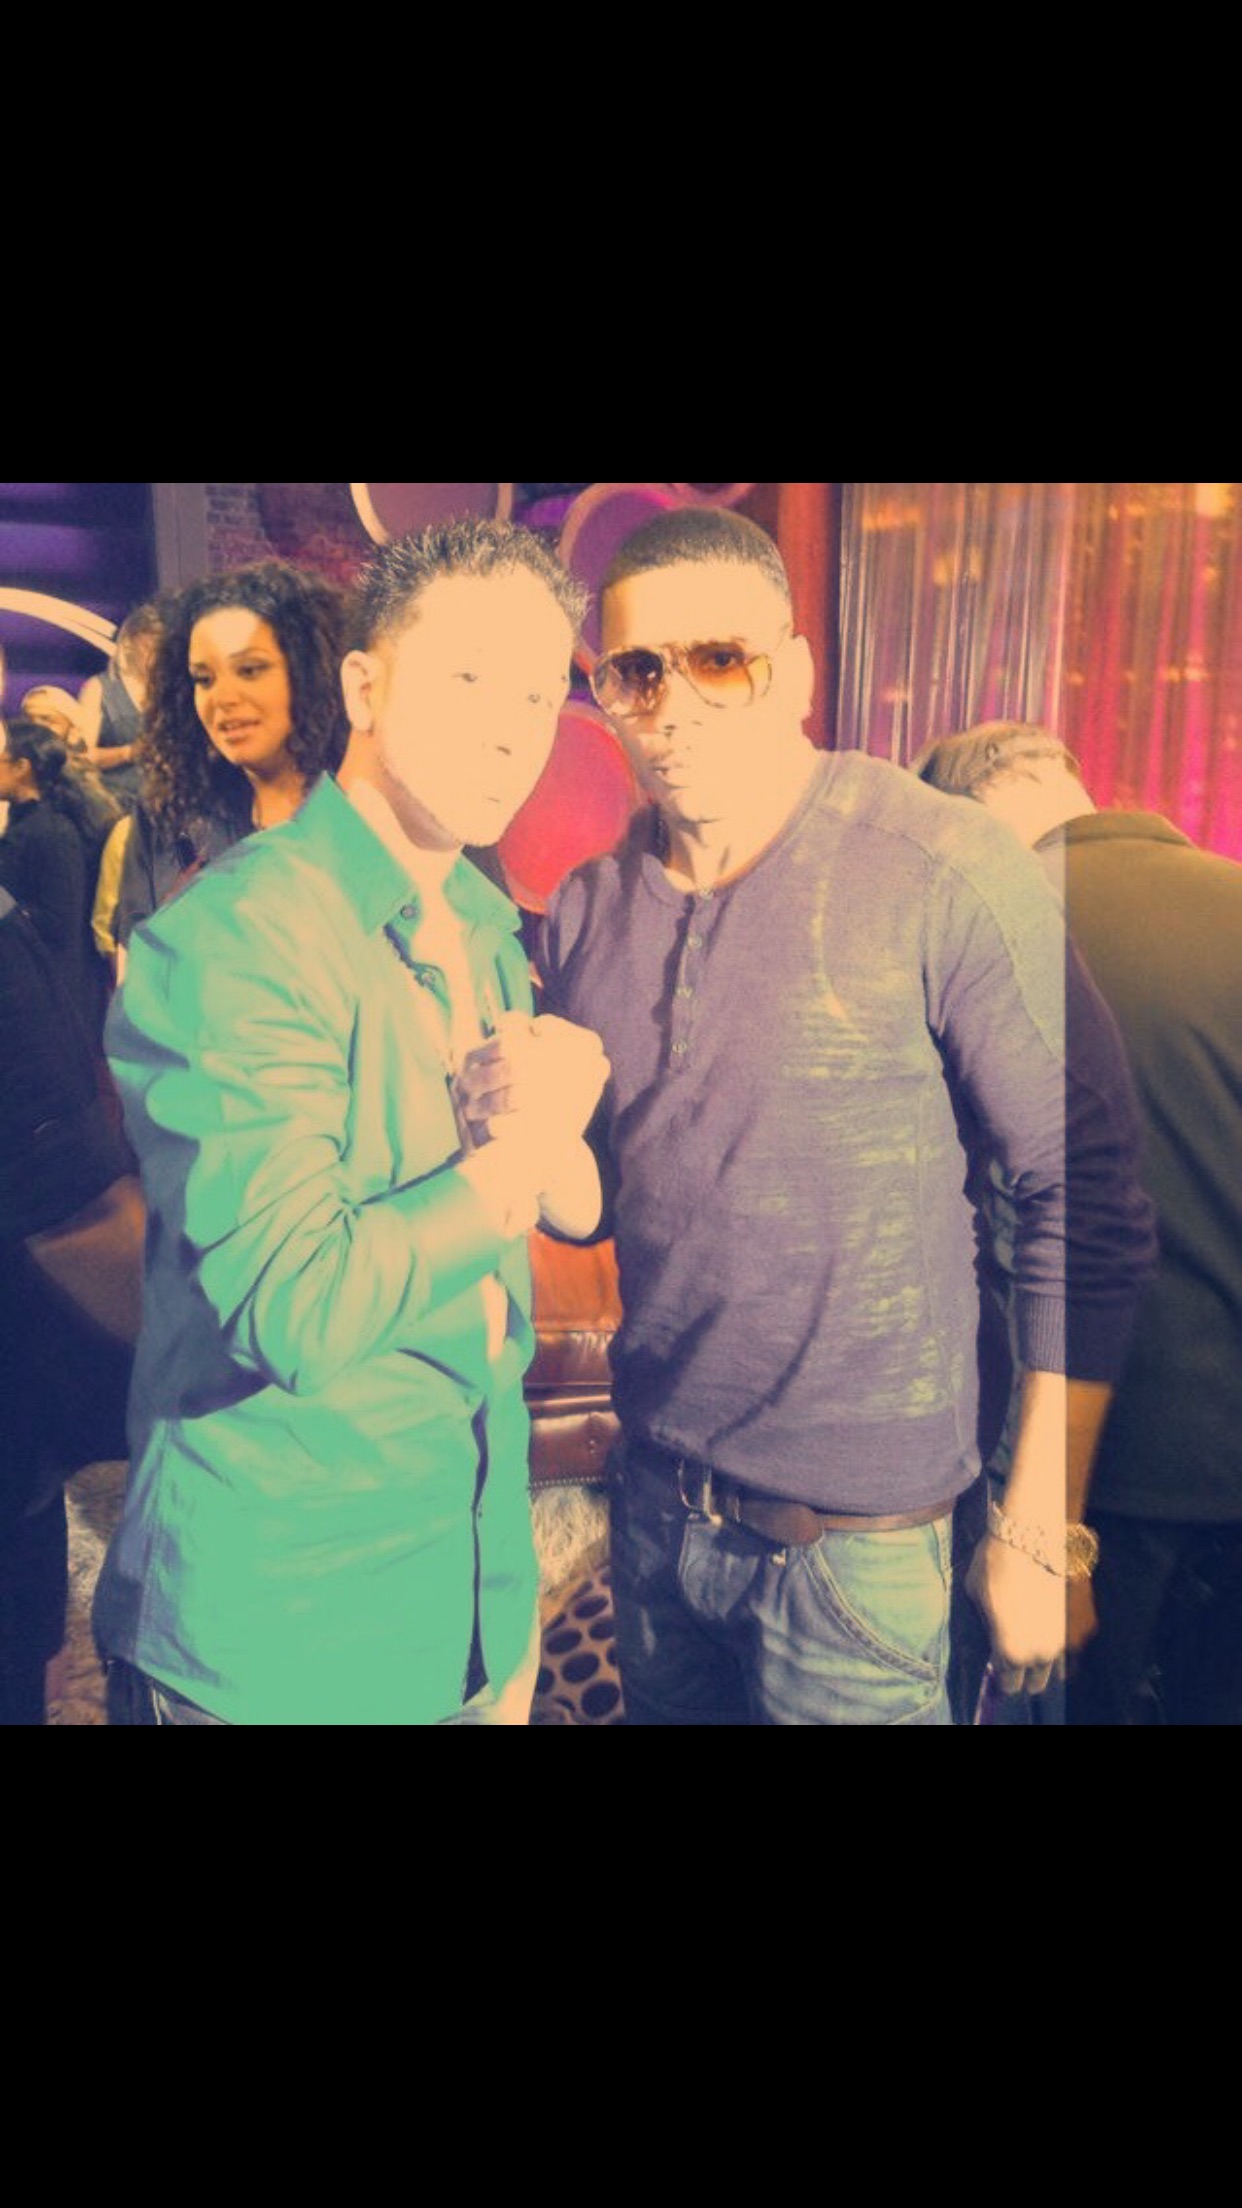 Me and Rapper Nelly on set of The Jenny McCarthy show